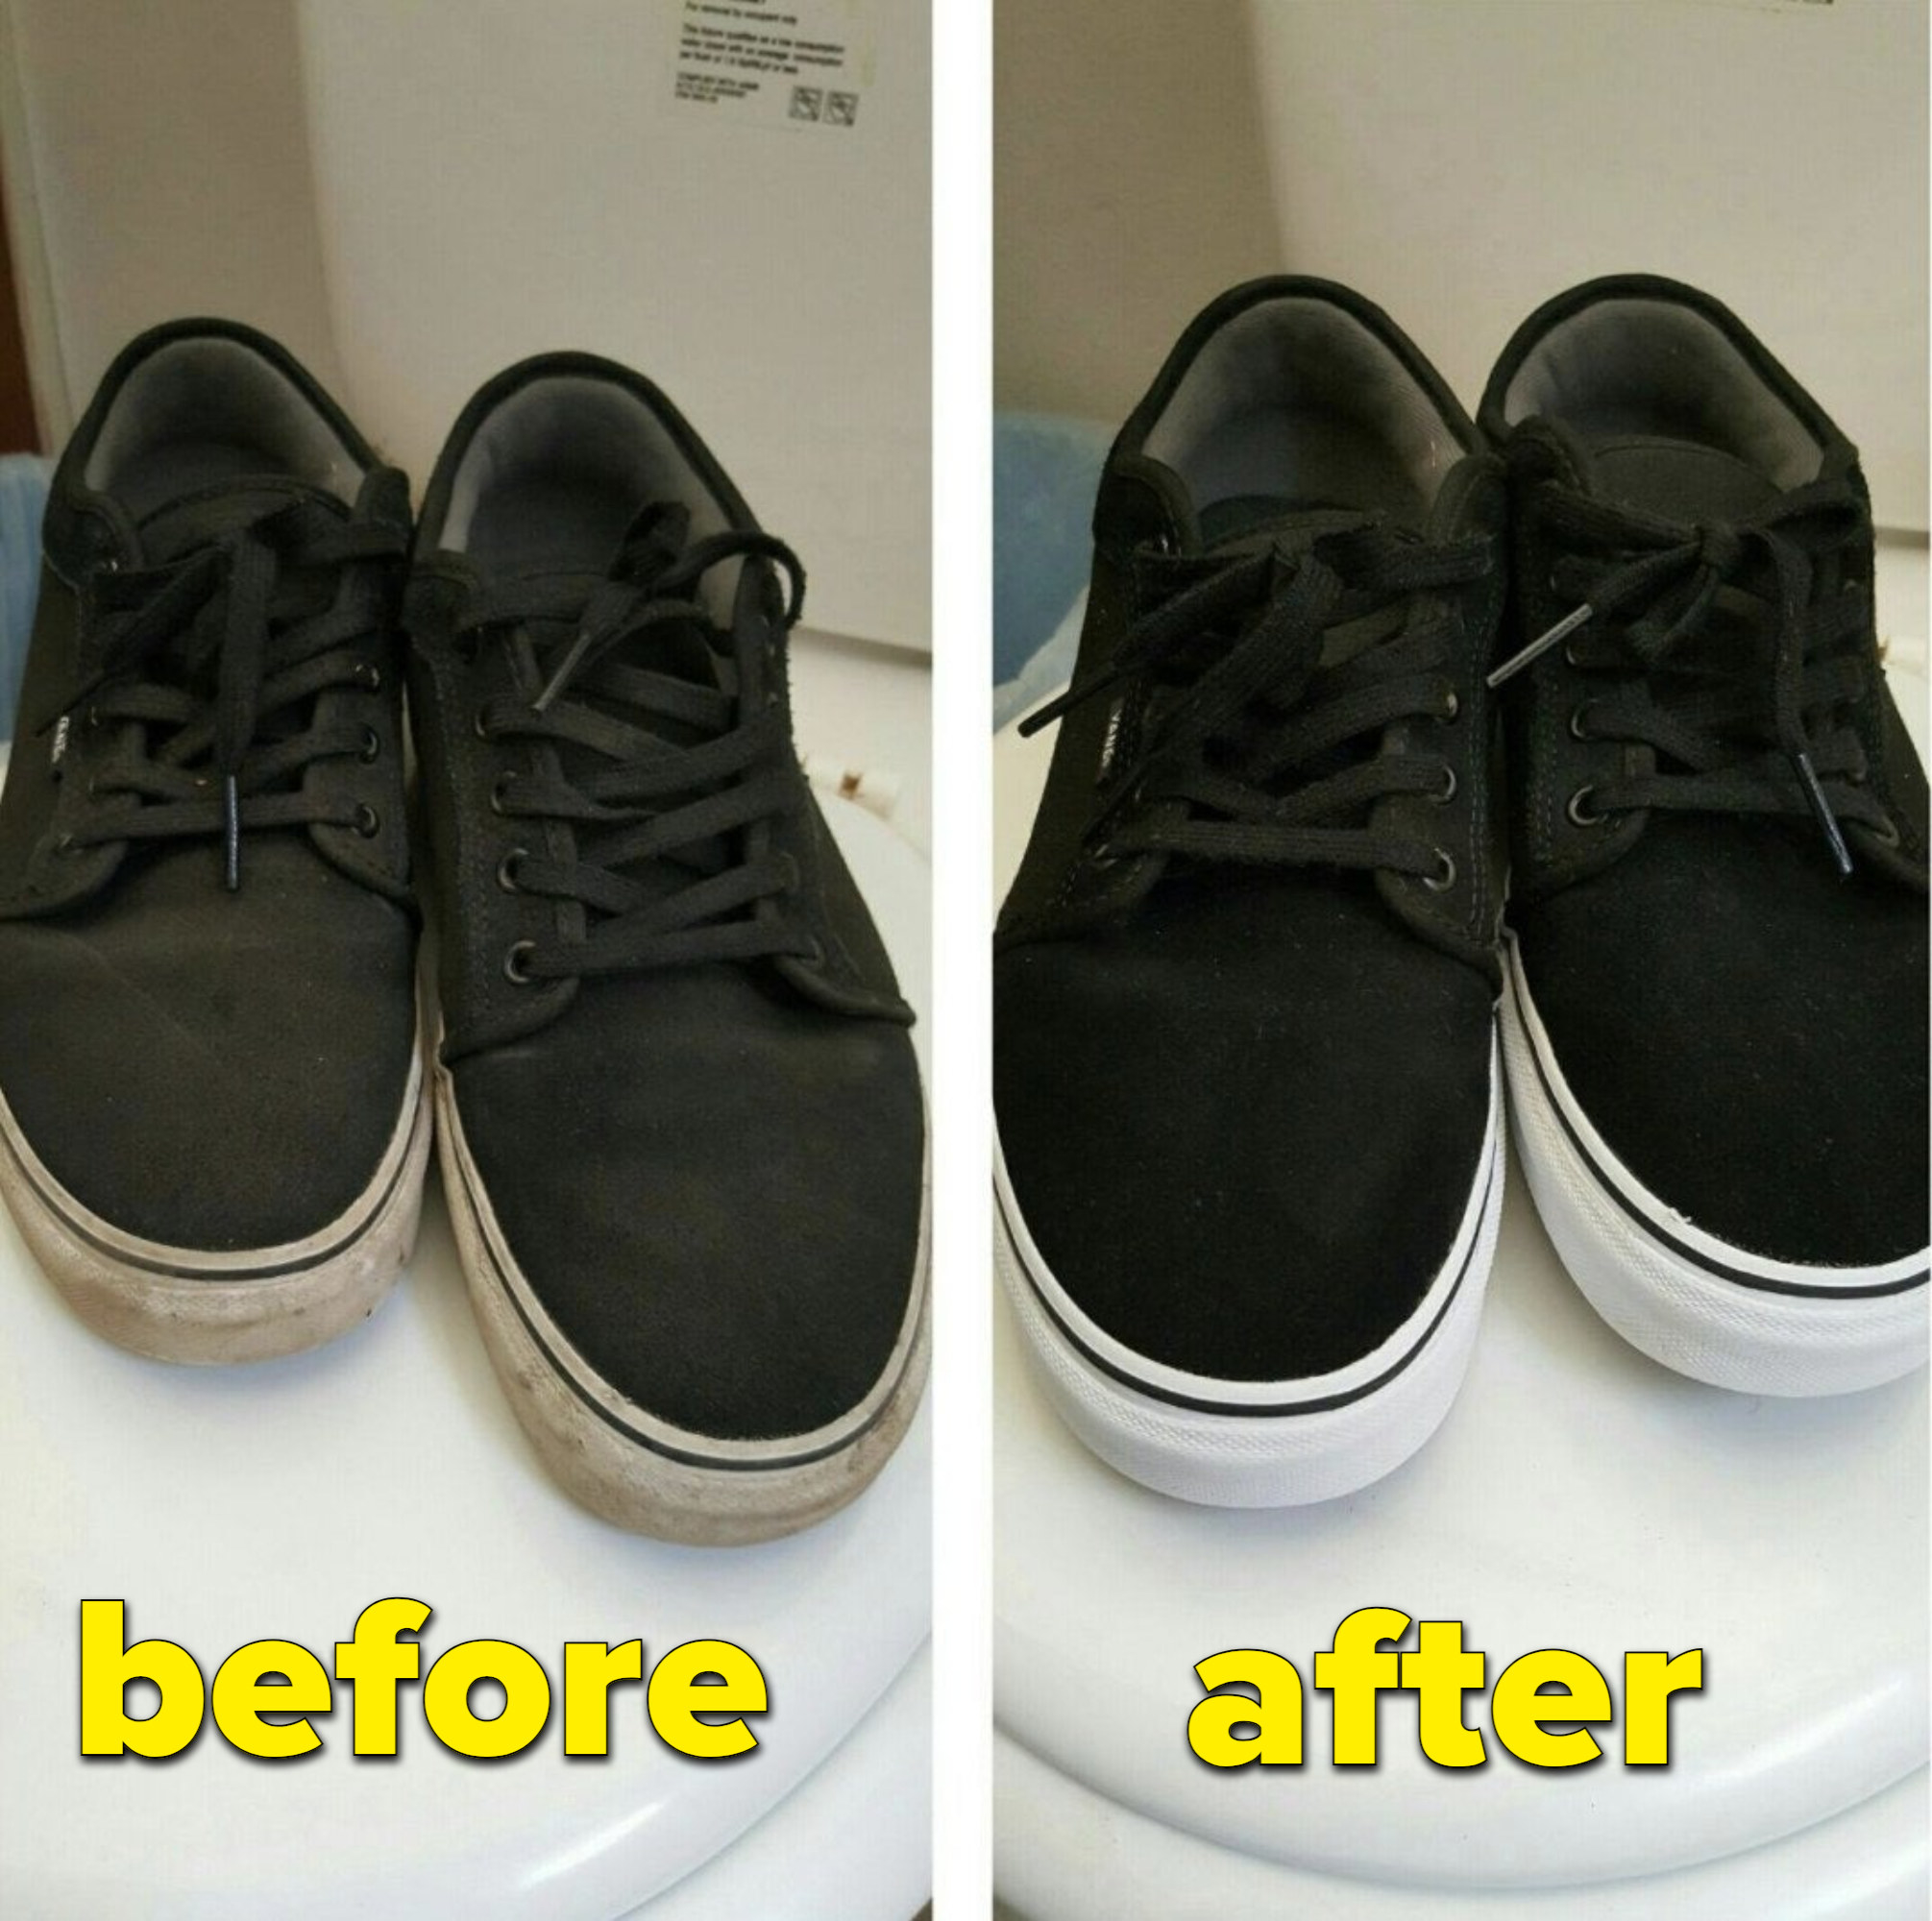 A before and after photo of dirty shoes cleaned with the product